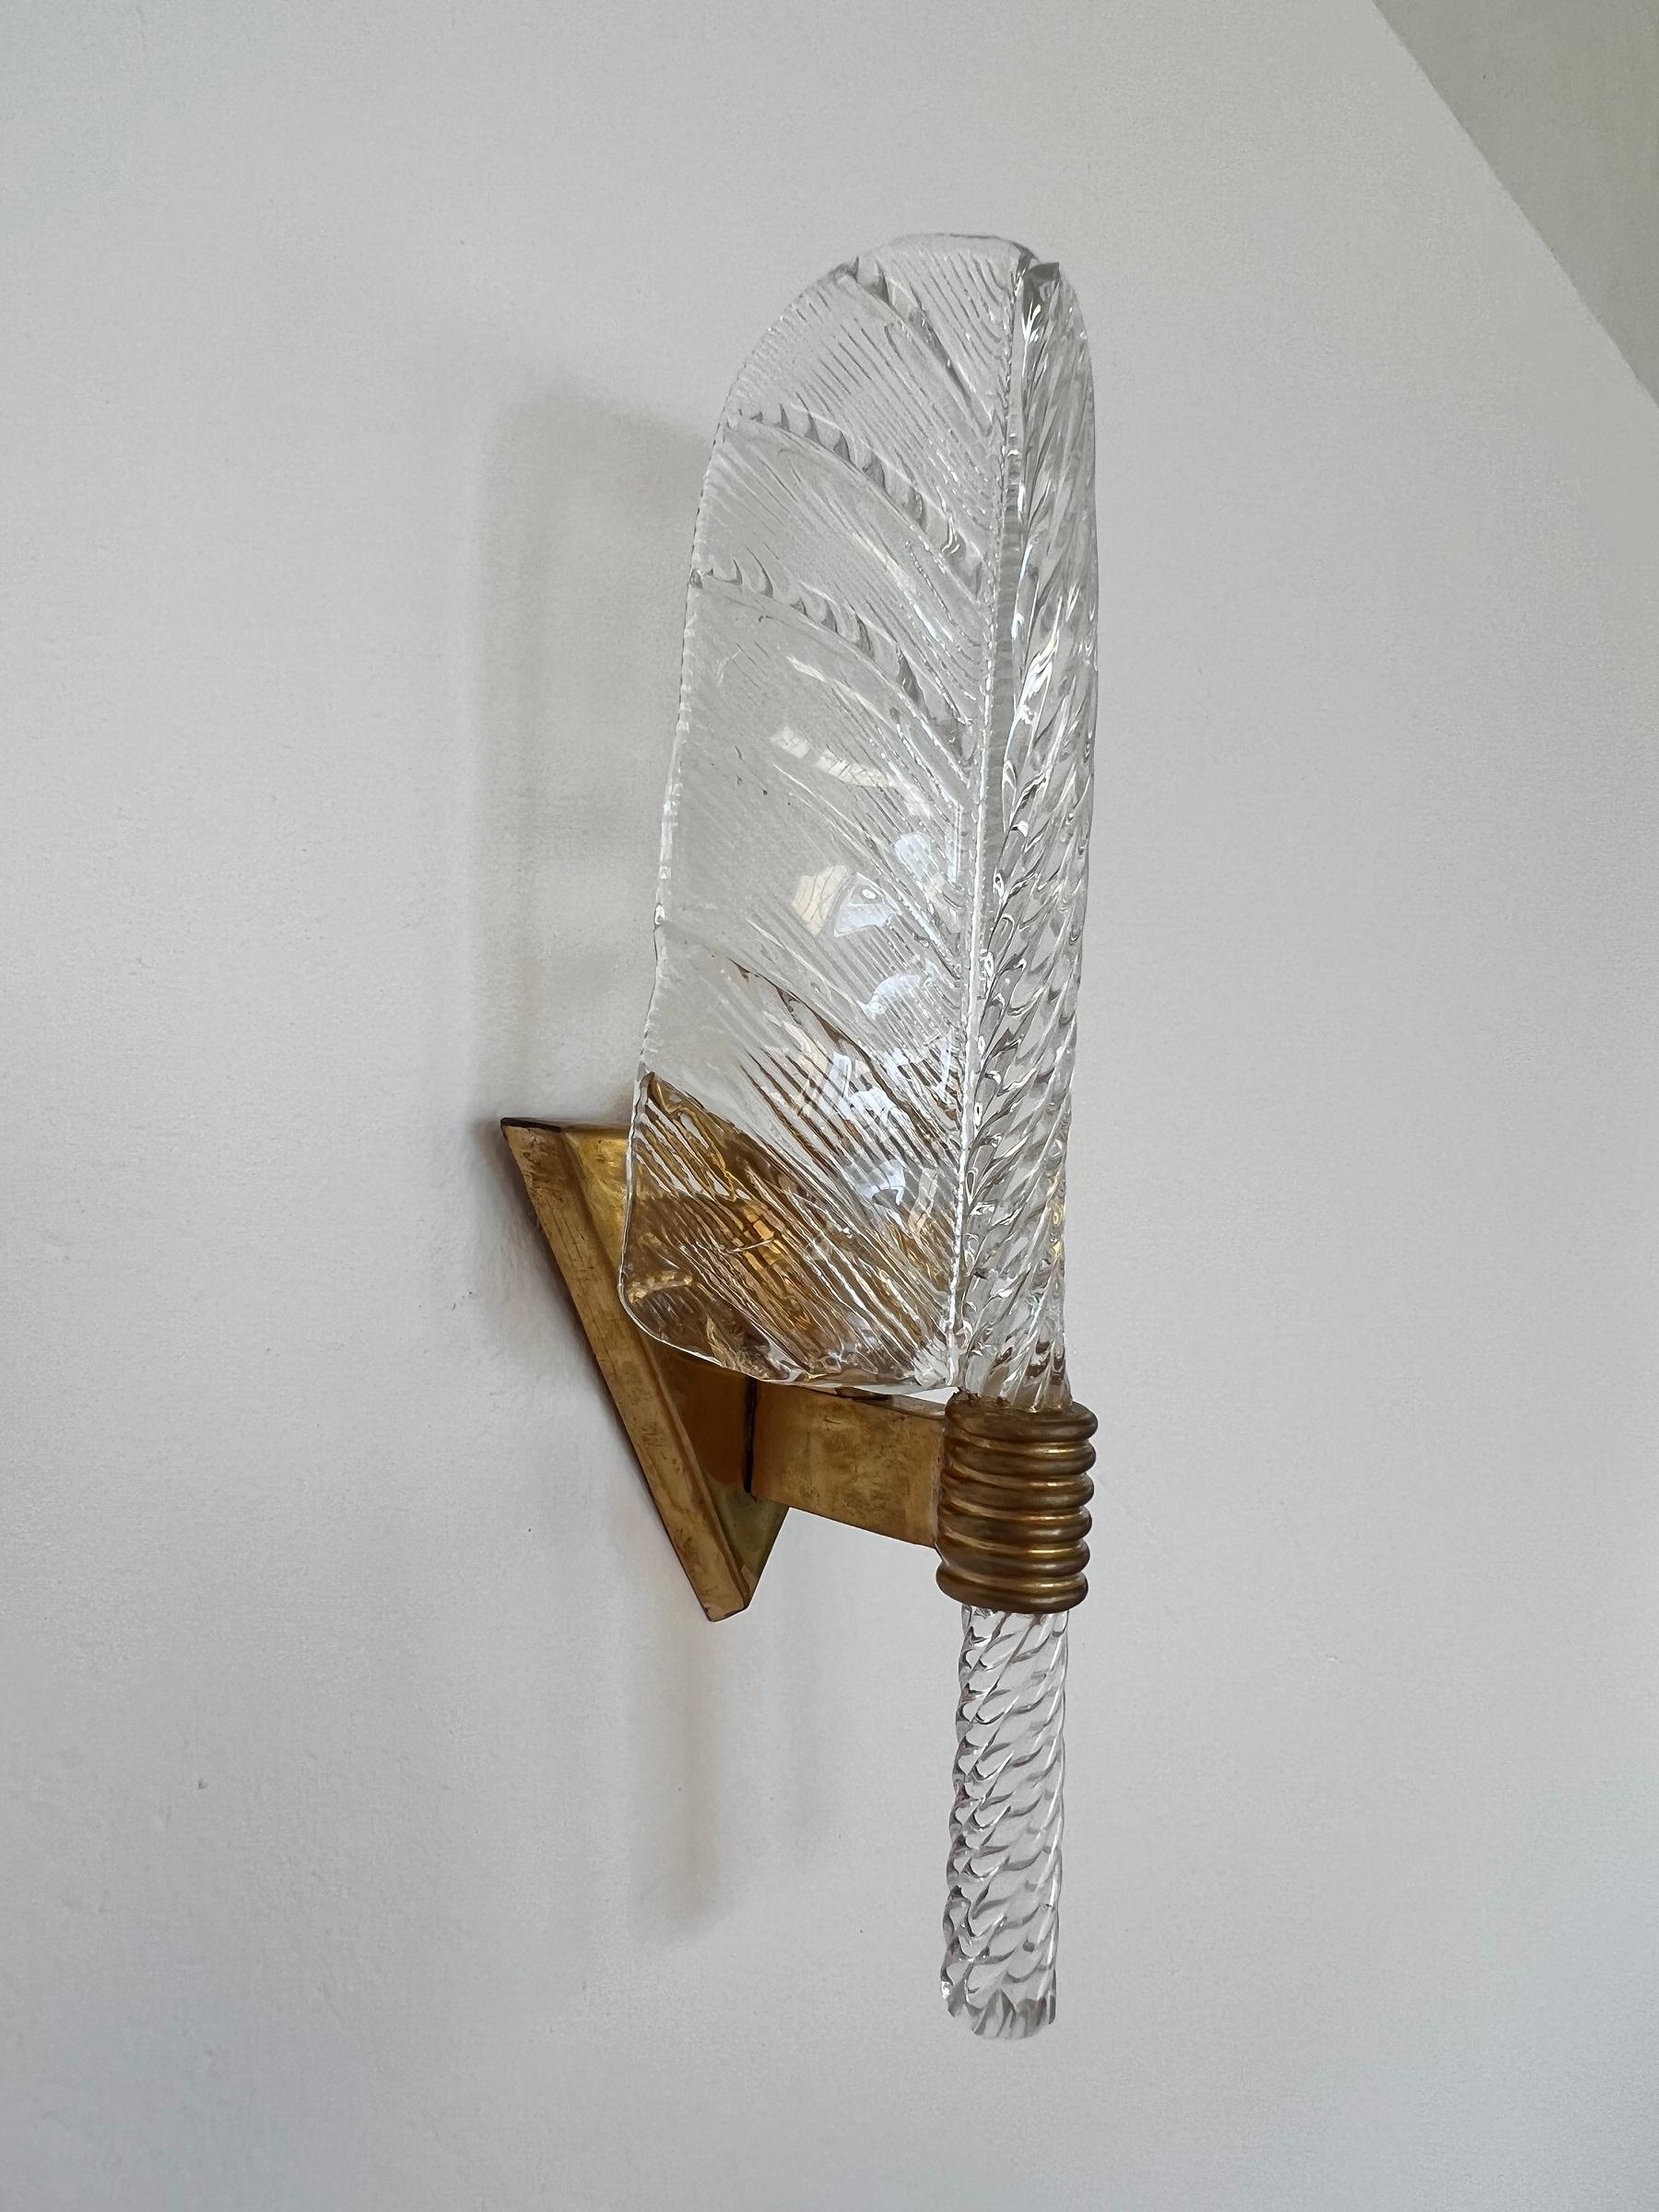 Italian Brass and Murano Glass Leaves Wall Lights in Barovier Toso Style, 1990s For Sale 4